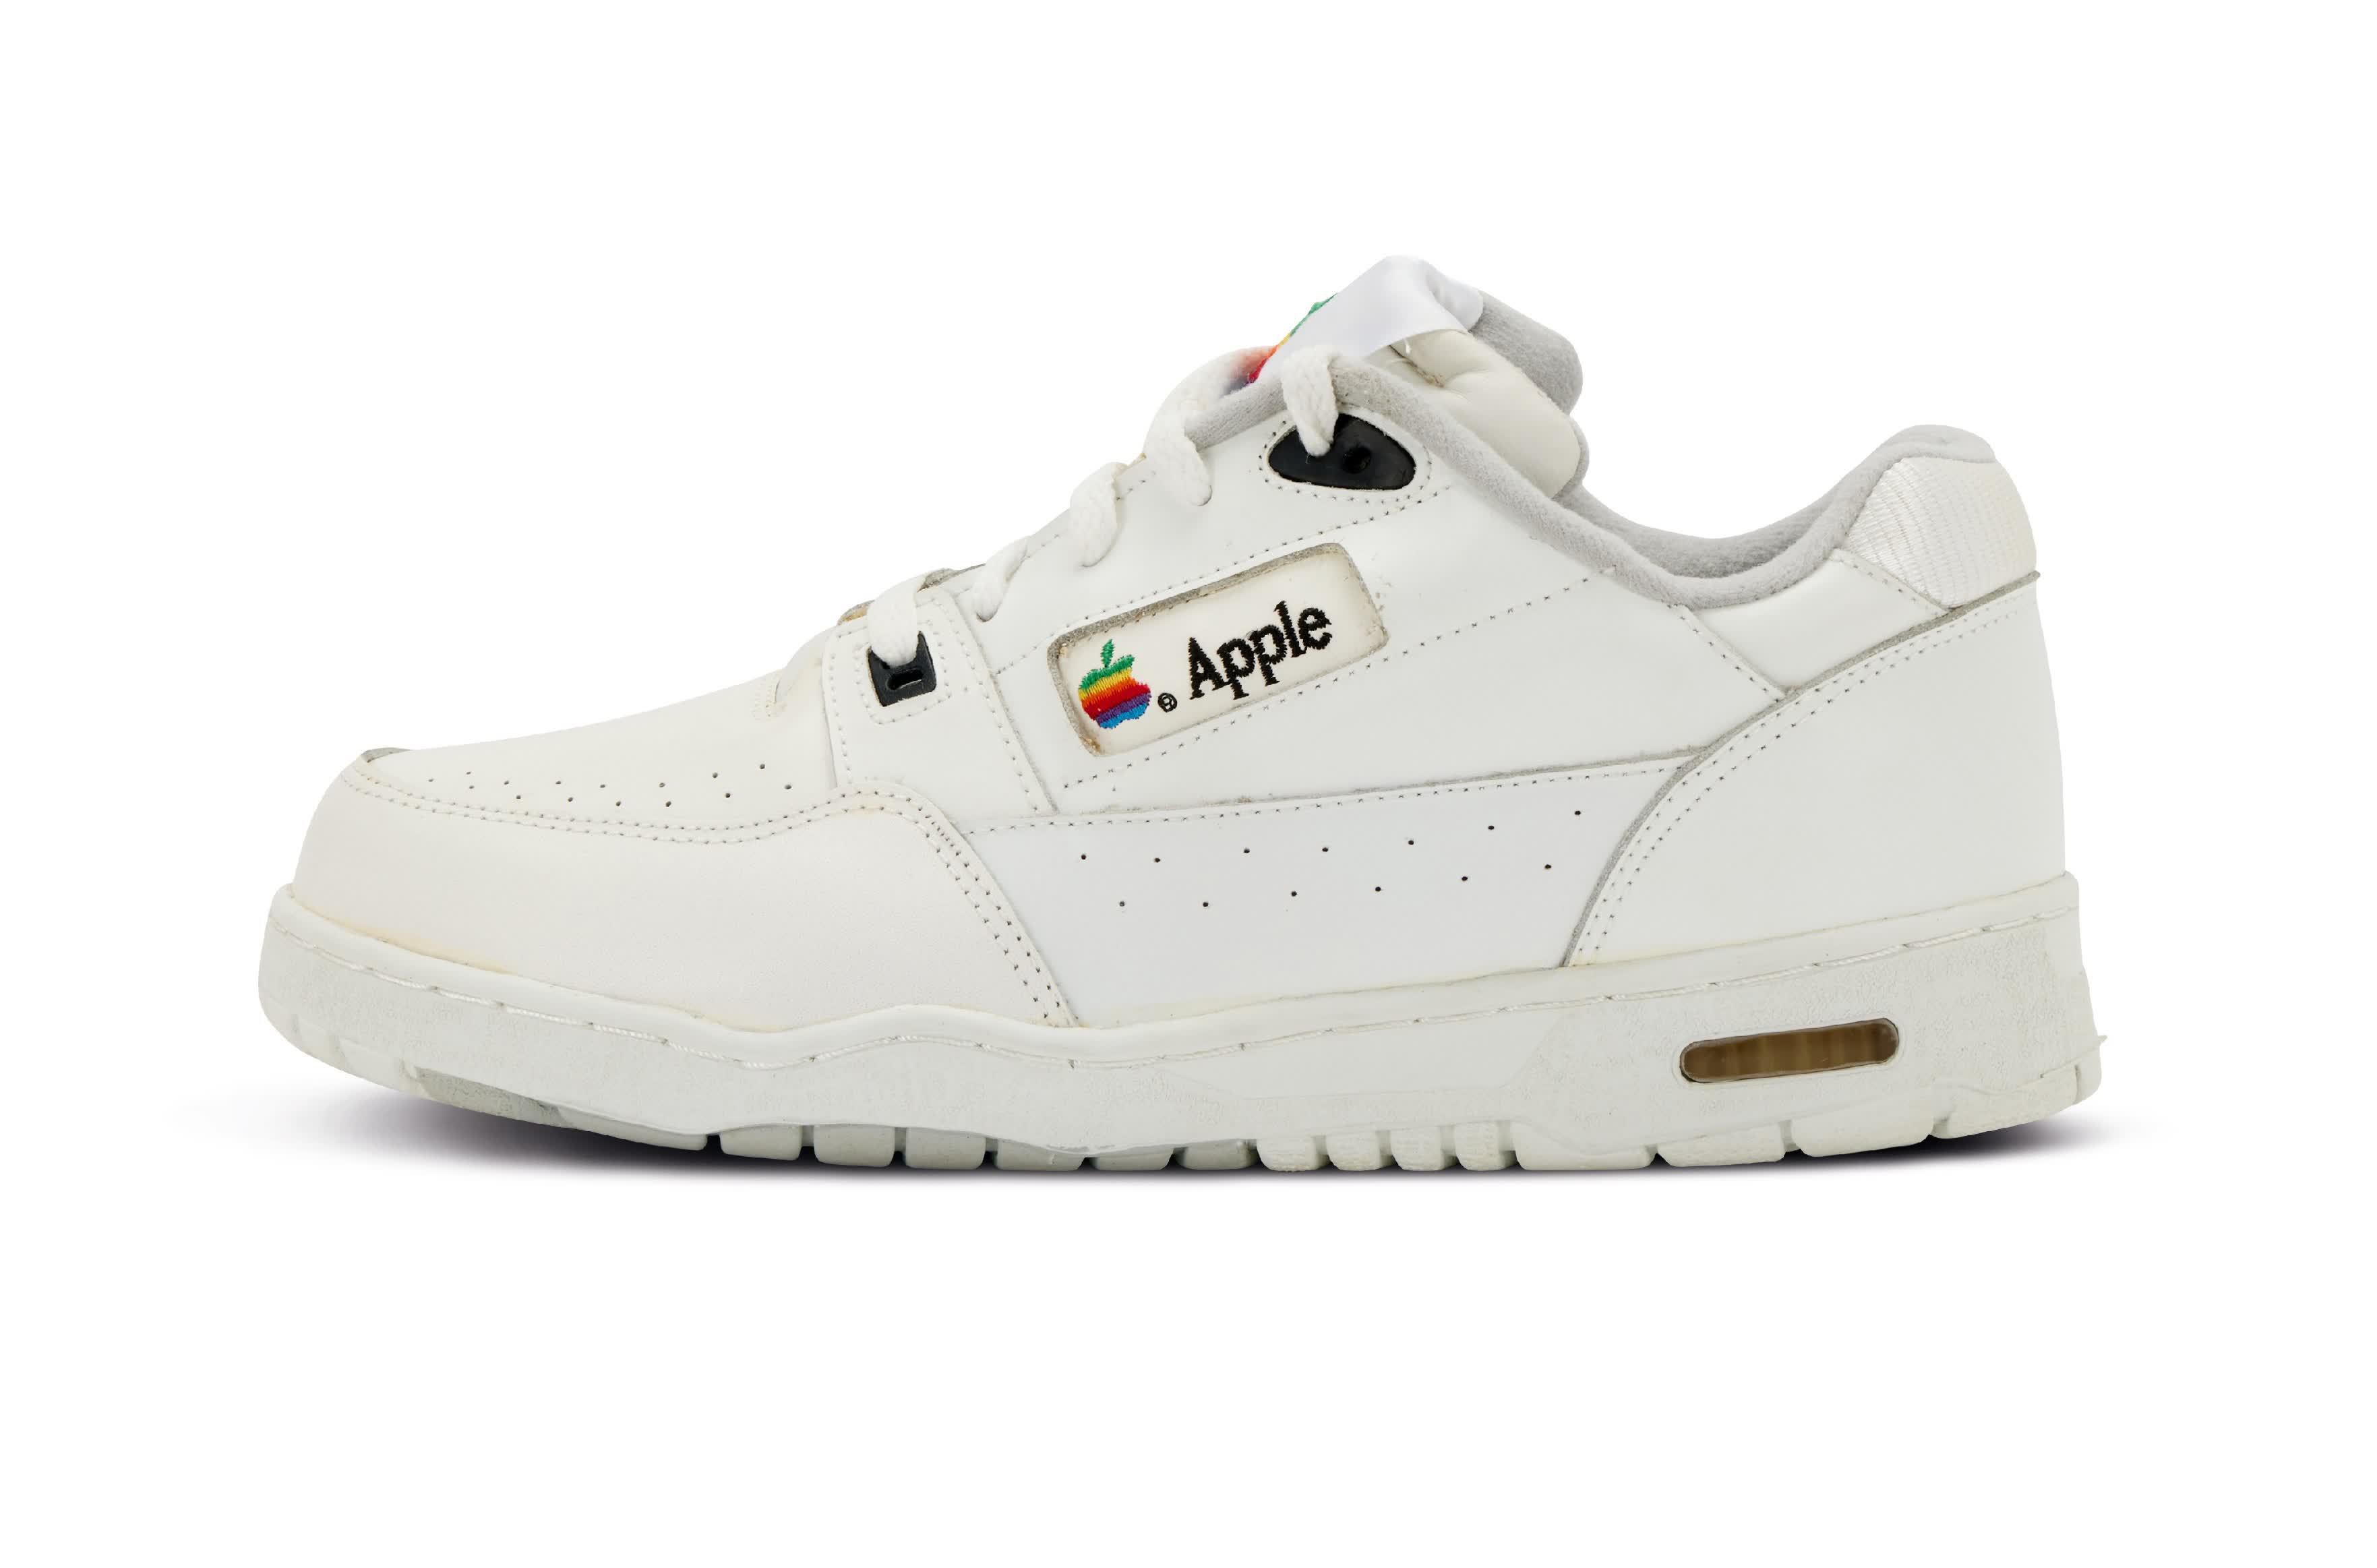 You can now buy these ultra-rare Apple sneakers for $50,000